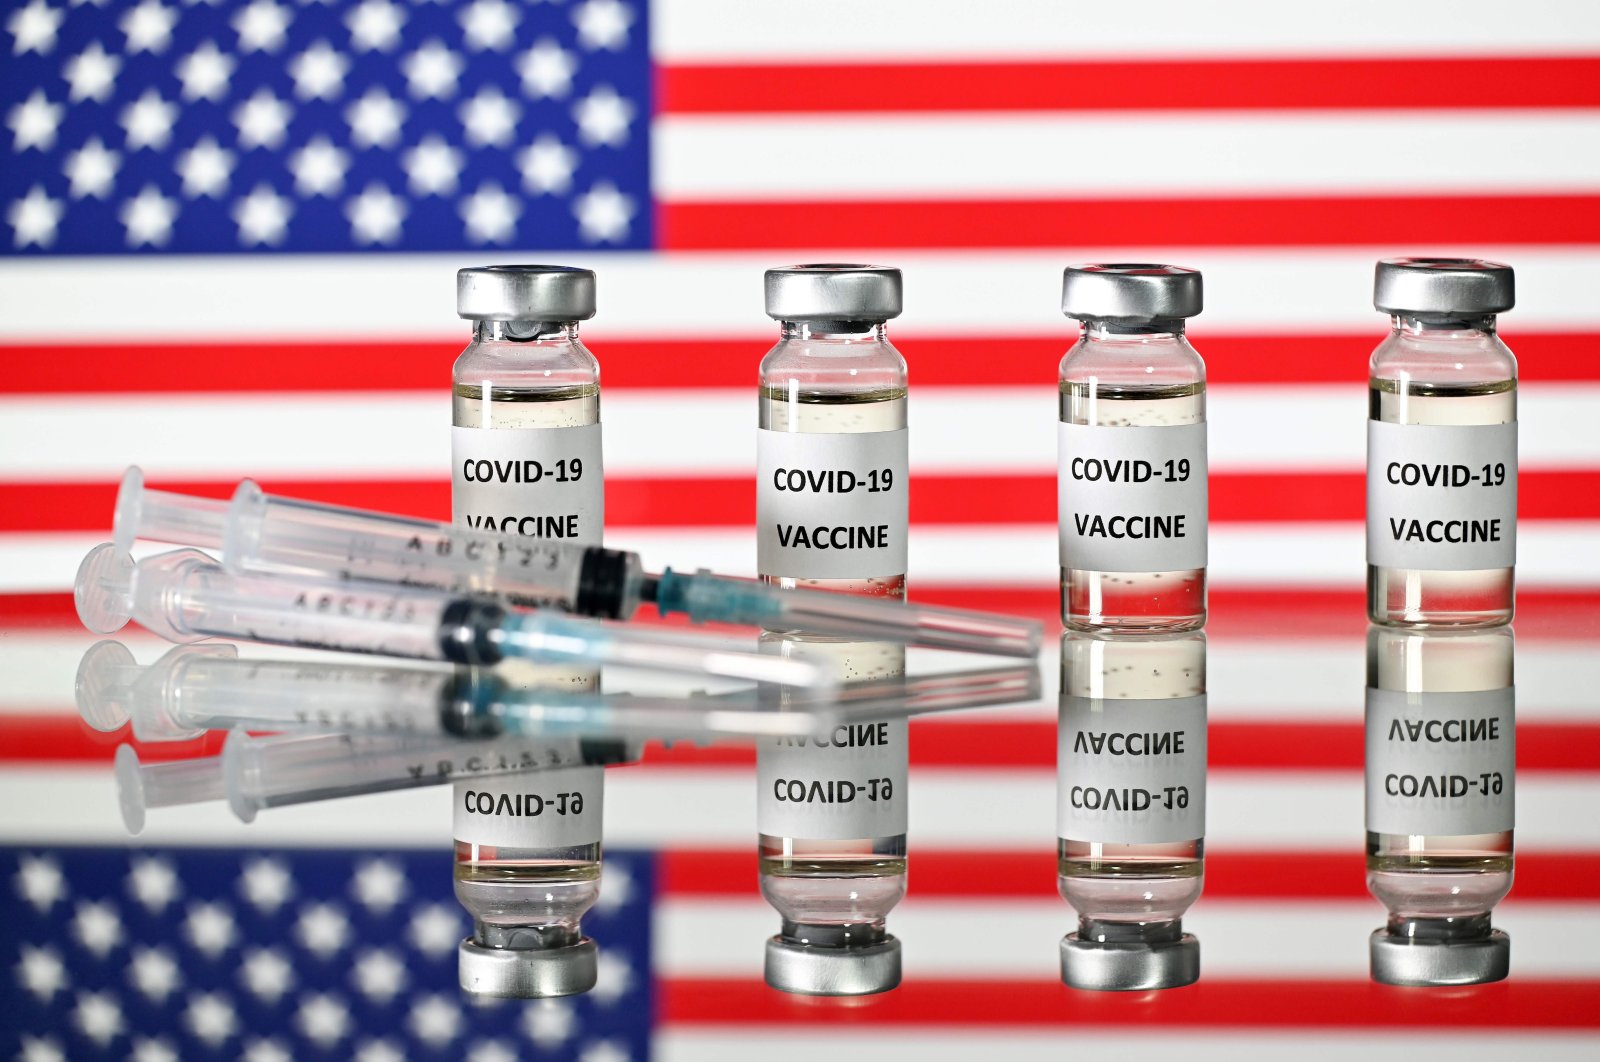 An illustration of vials with COVID-19 vaccine stickers and syringes displayed in front of the U.S. flag, Nov. 17, 2020. (AFP Photo)